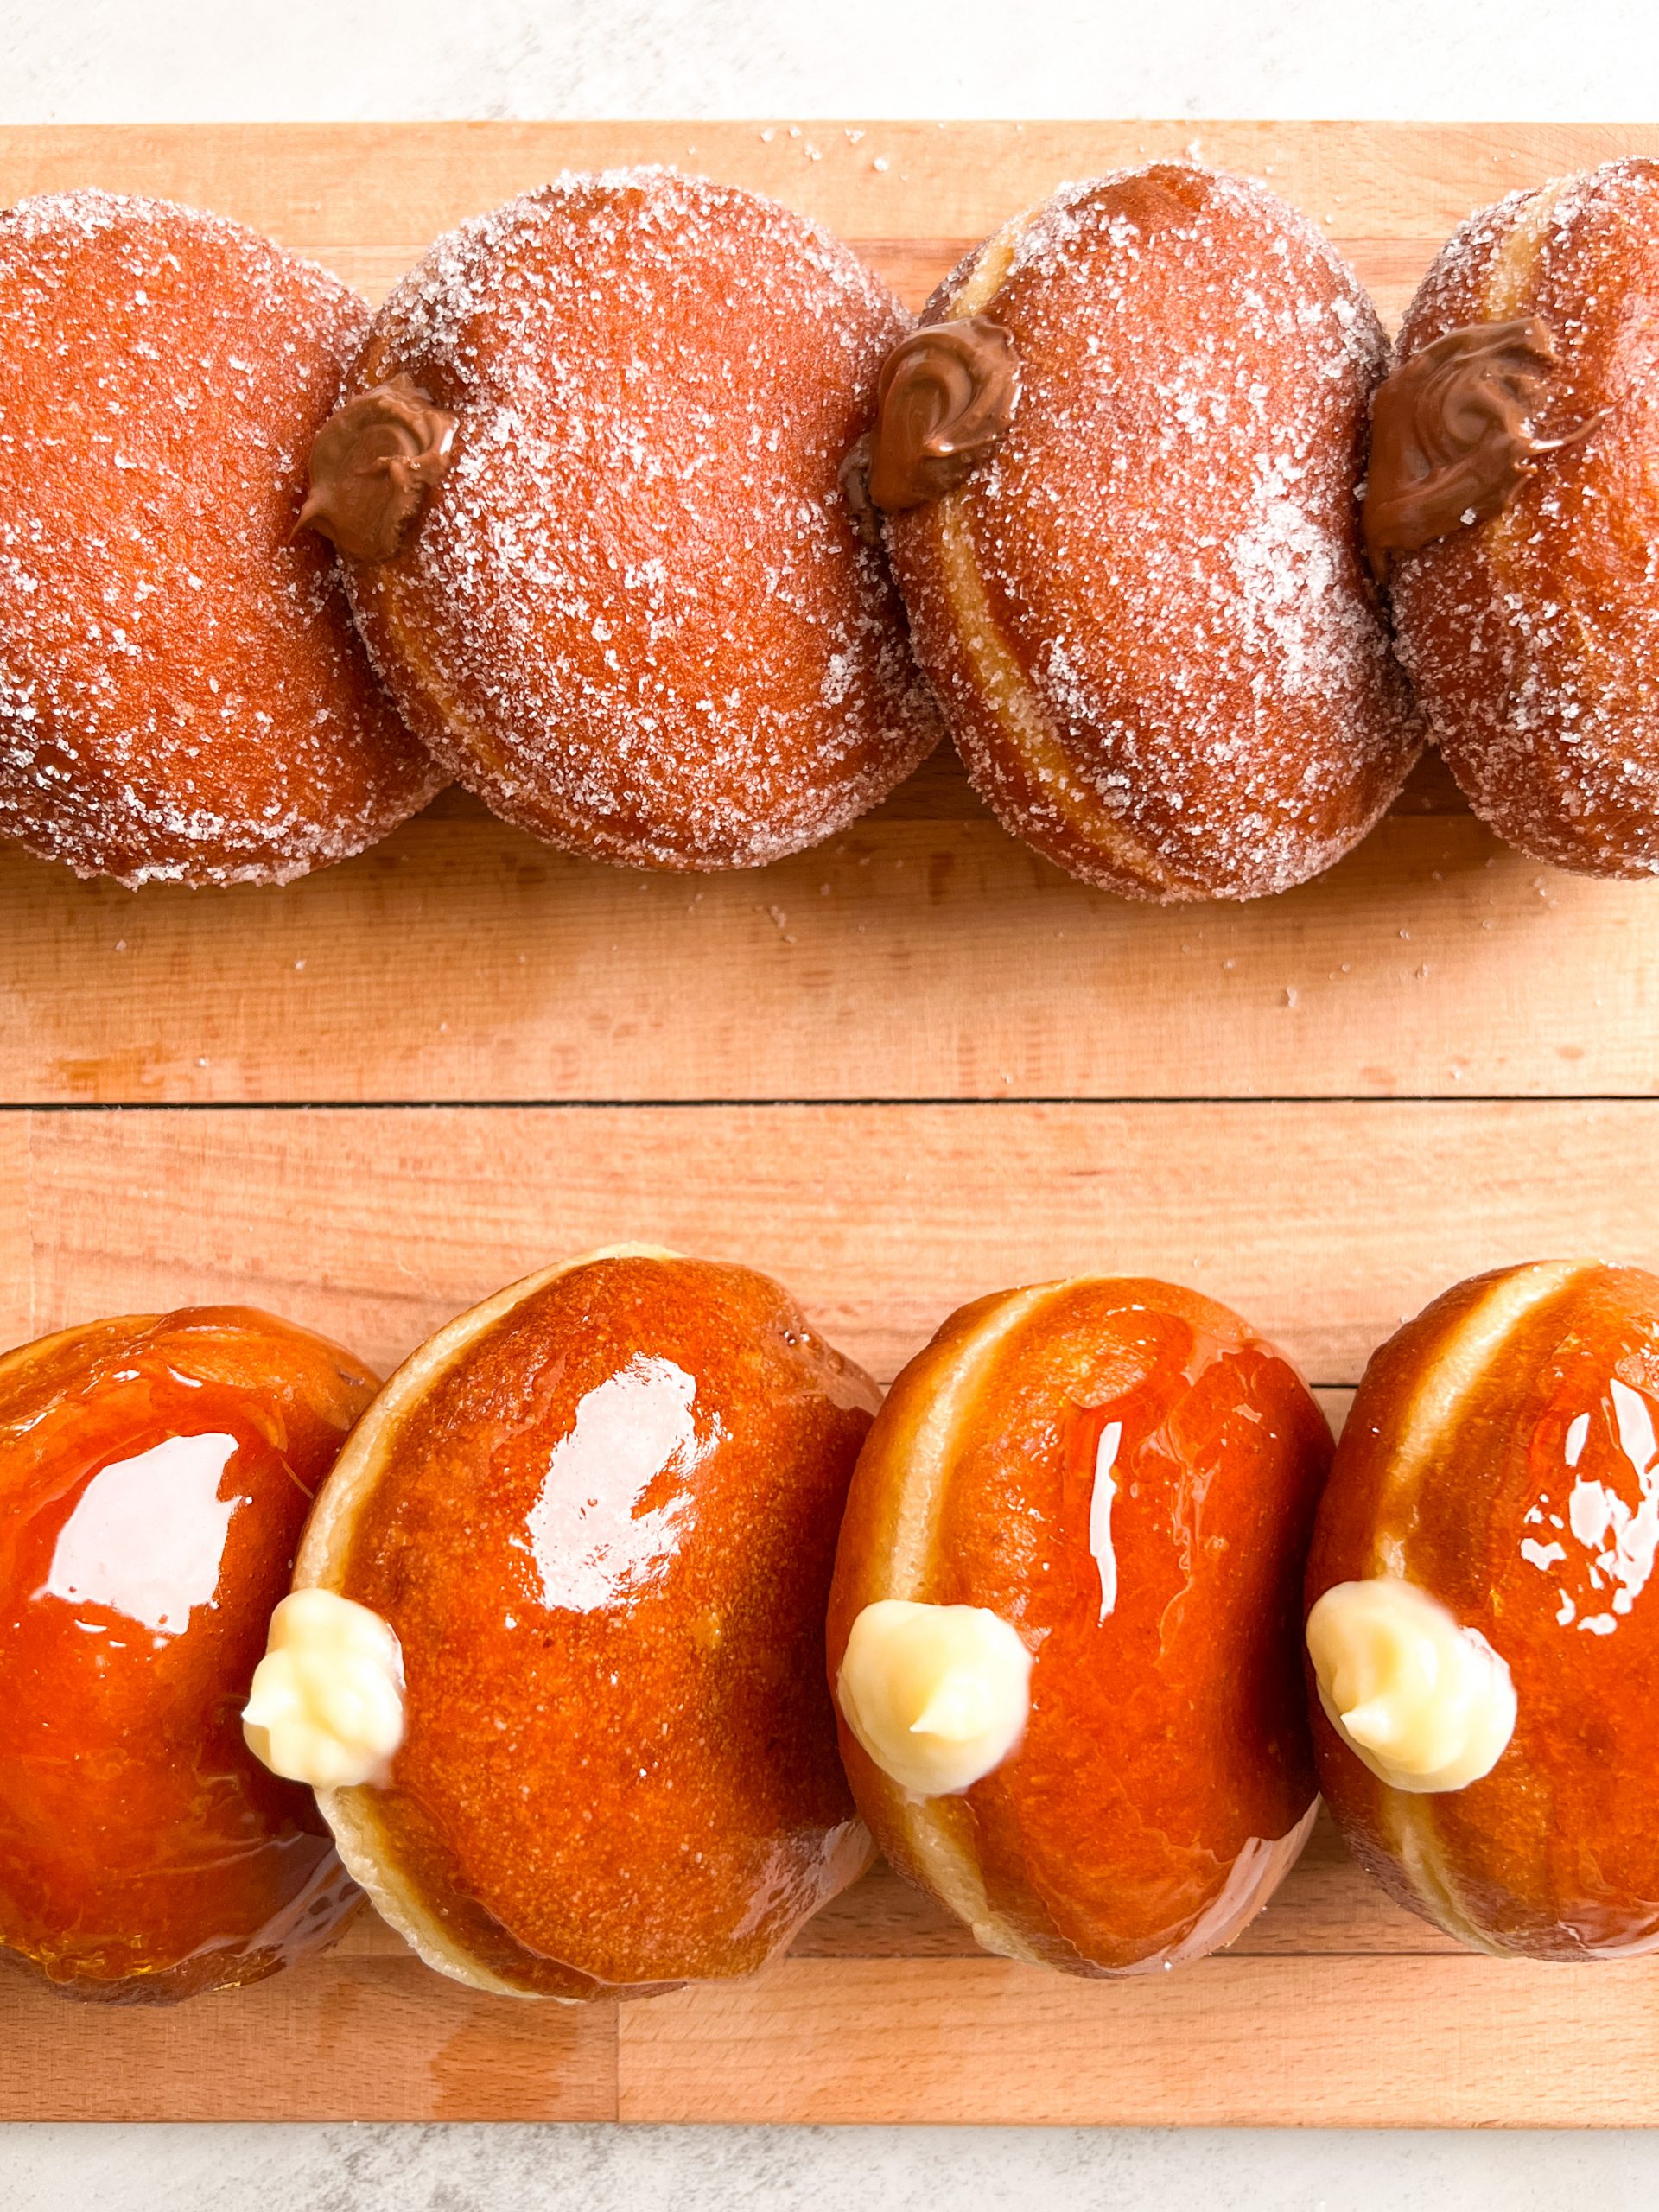 Stacked nutella donuts with sugar coating on the top, and creme brulee donuts with caramel coating on the bottom